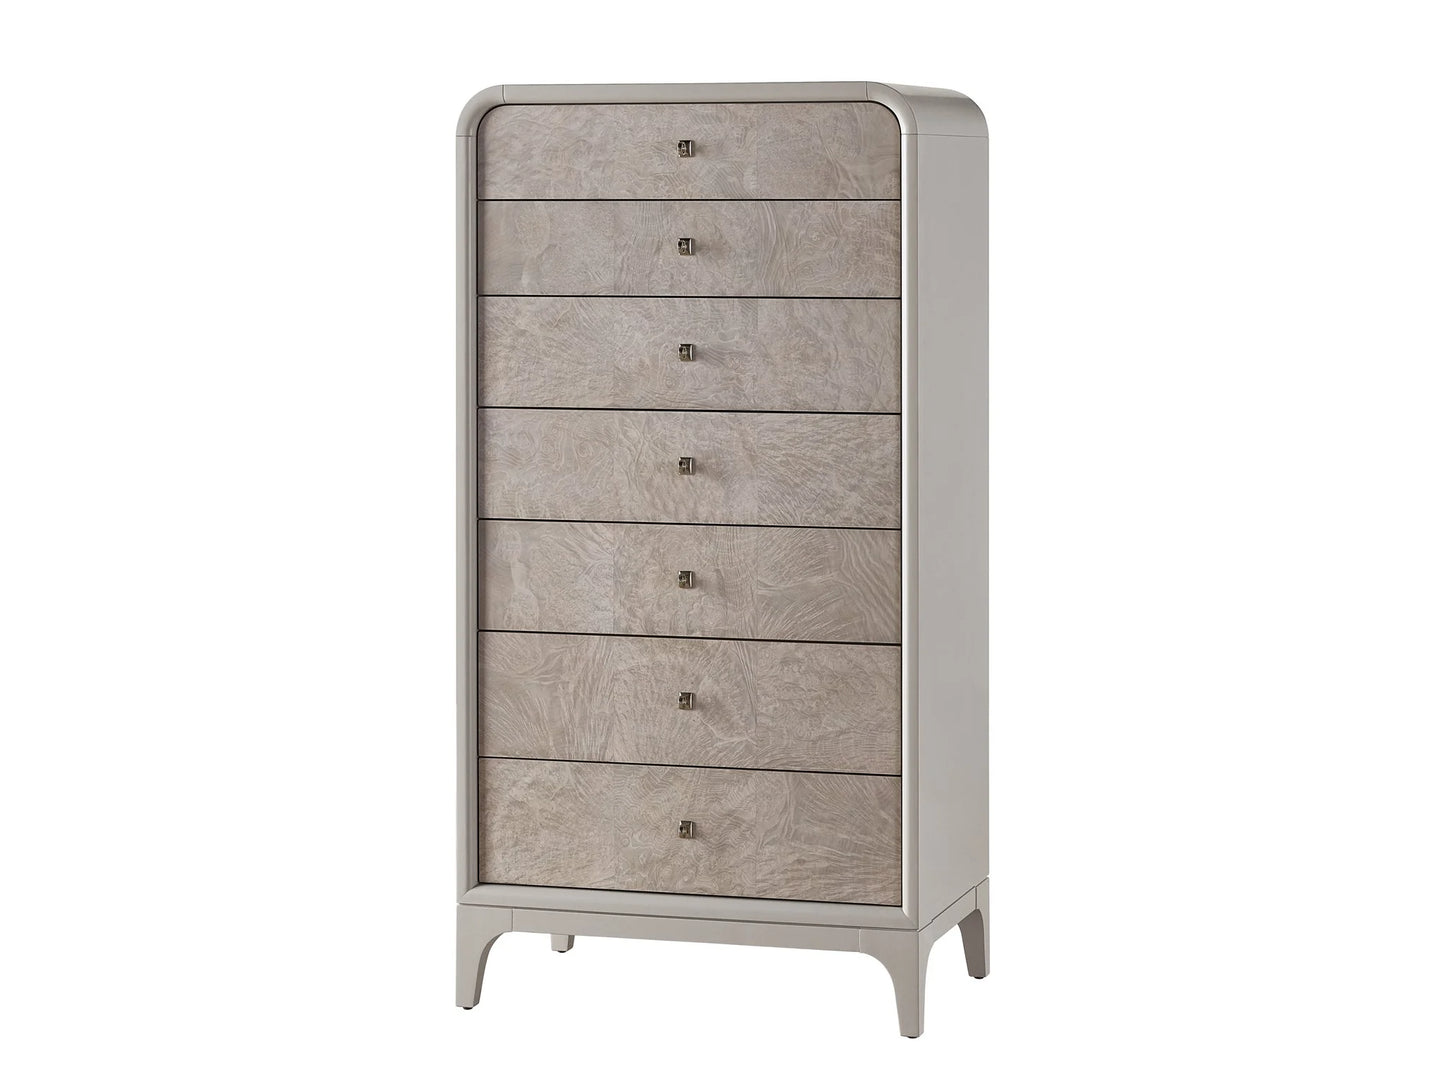 UNIVERSAL - TRANQUILITY - MIRANDA KERR HOME IMMERSION CHEST